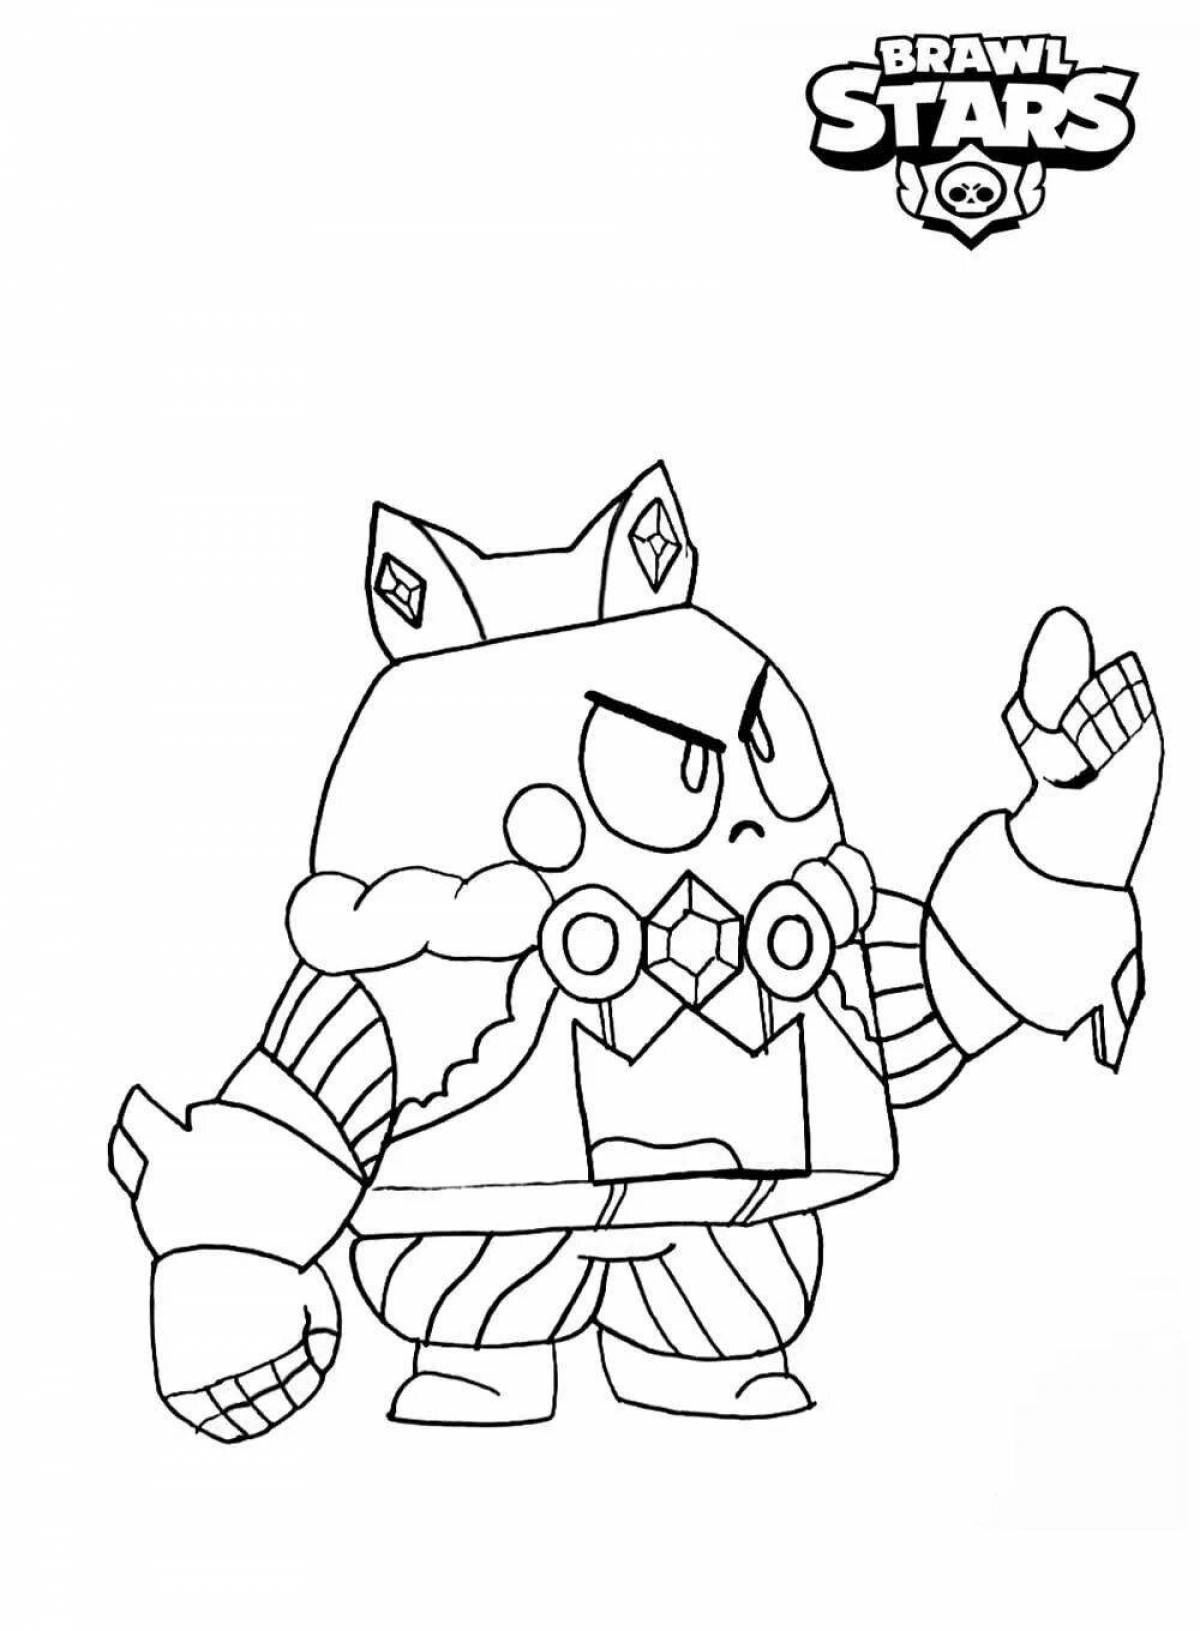 Tempting coloring pages for brawl stars skins